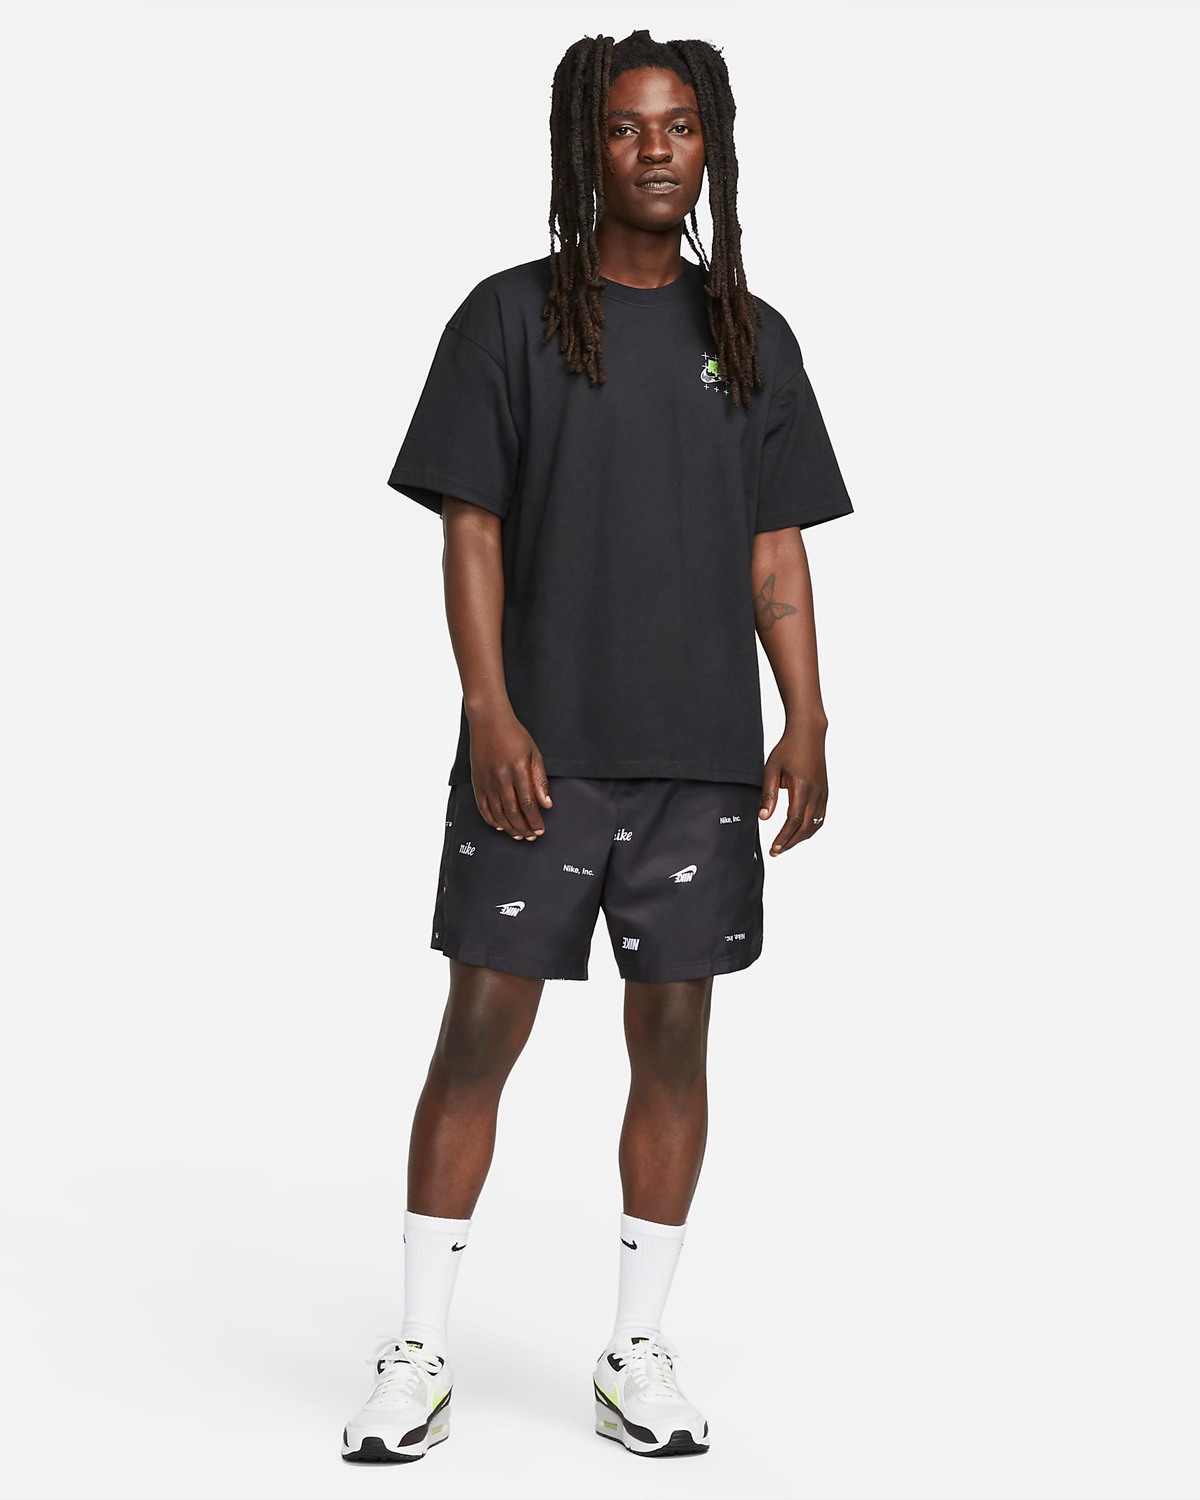 Nike-Club-Woven-Allover-Print-Flow-Shorts-Black-White-Outfit